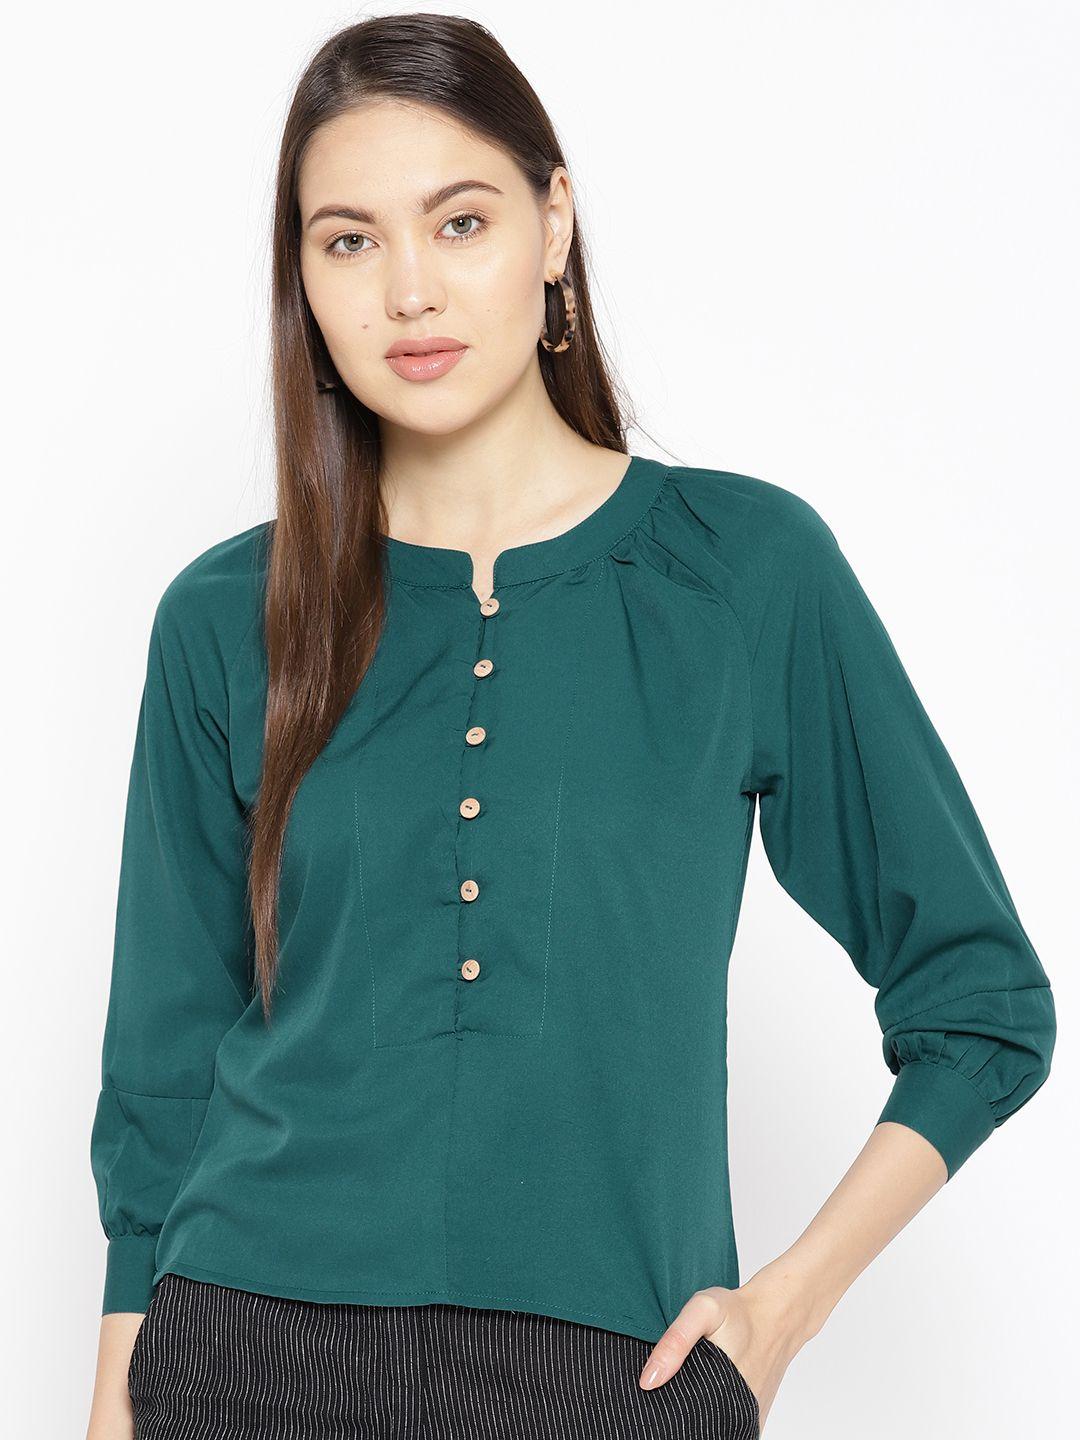 dodo & moa women teal green solid shirt style top